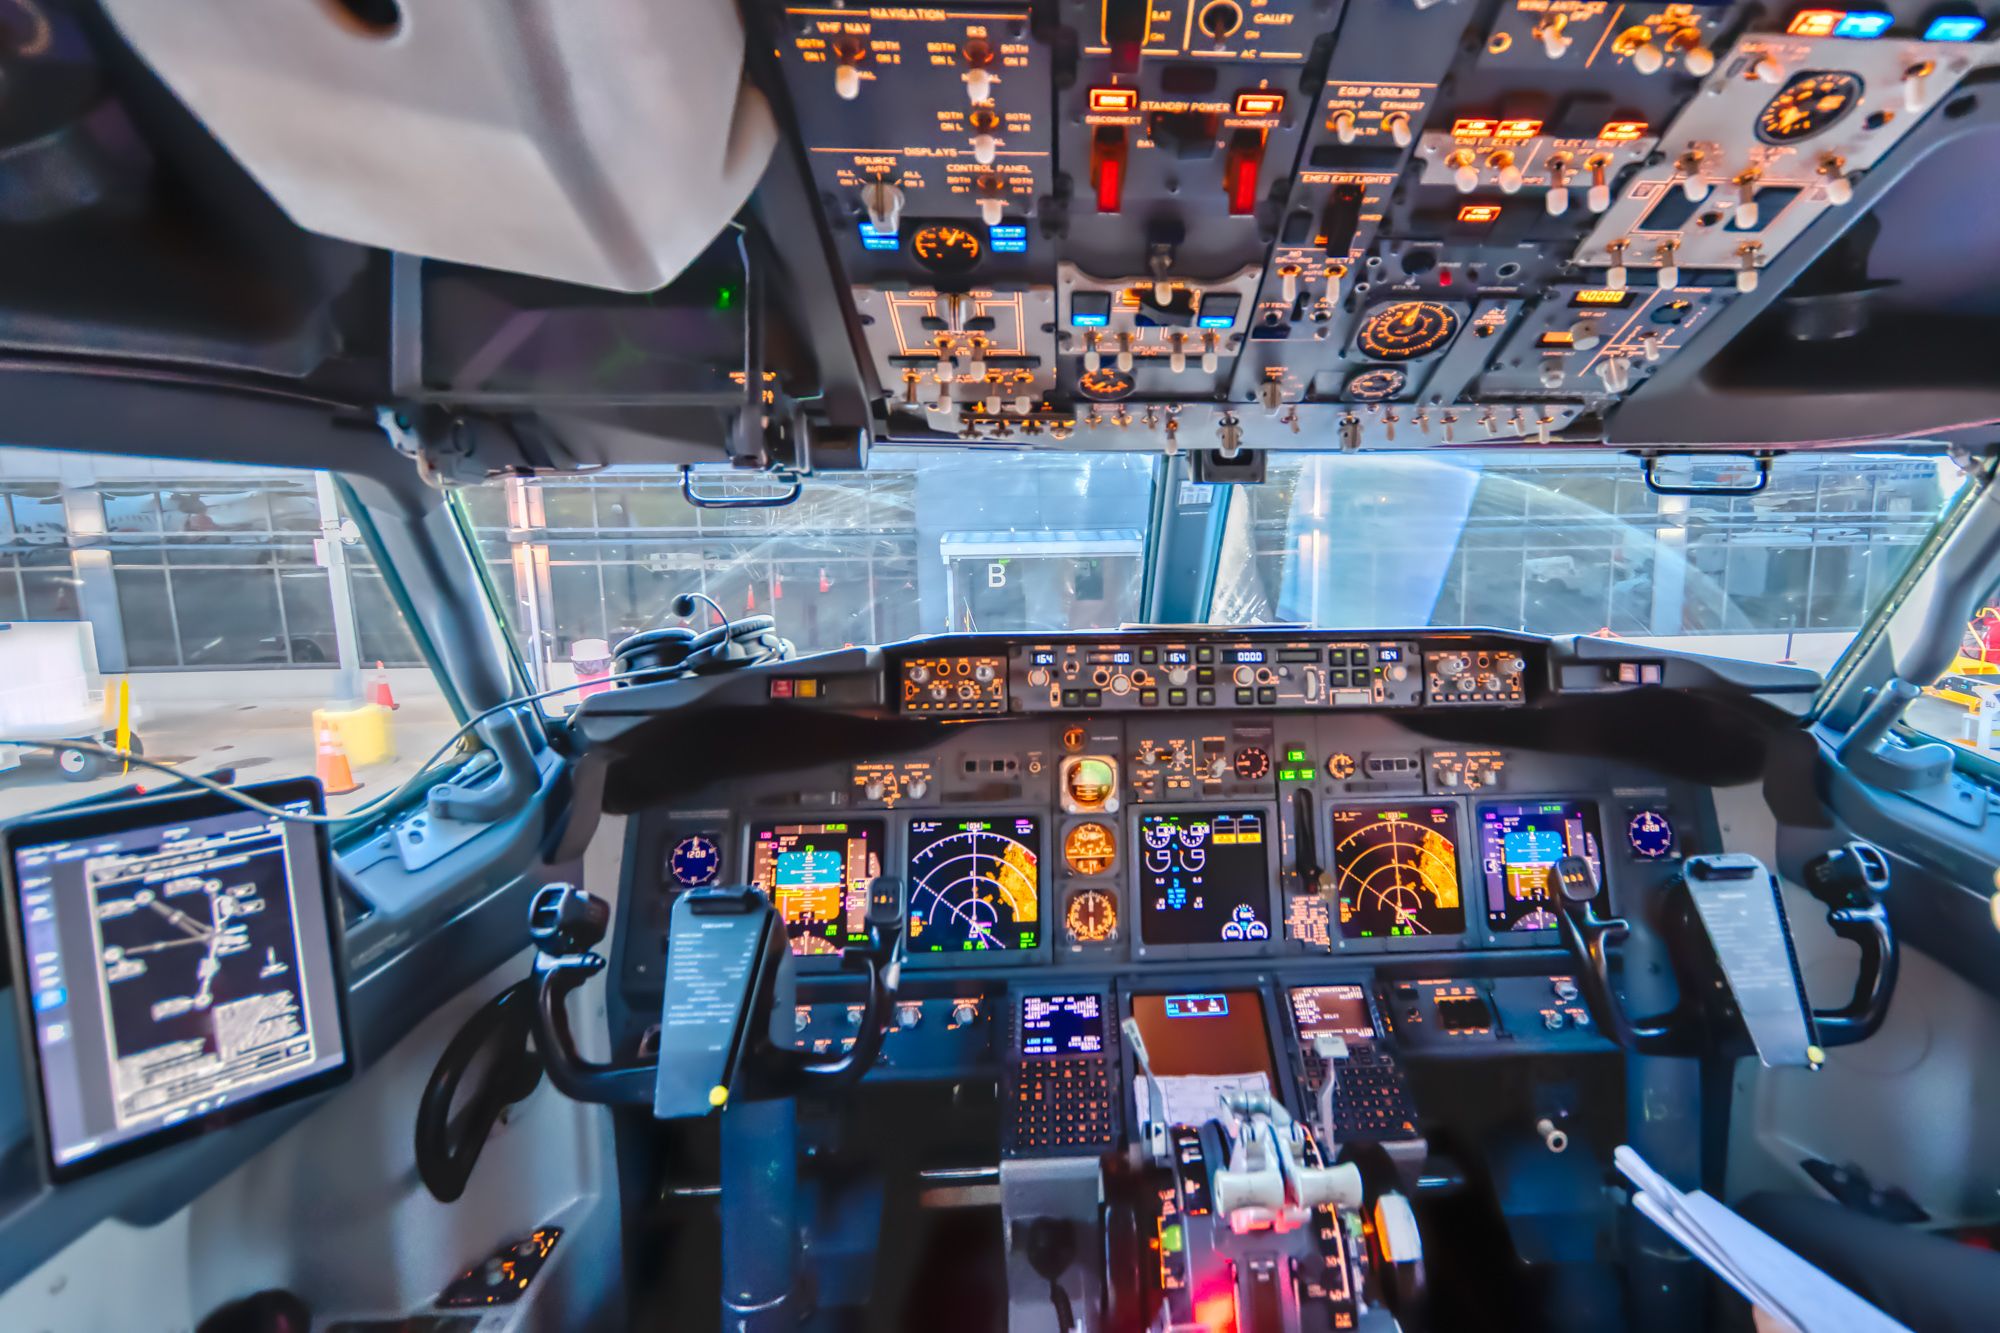 HDR of the 737-700 Cockpit